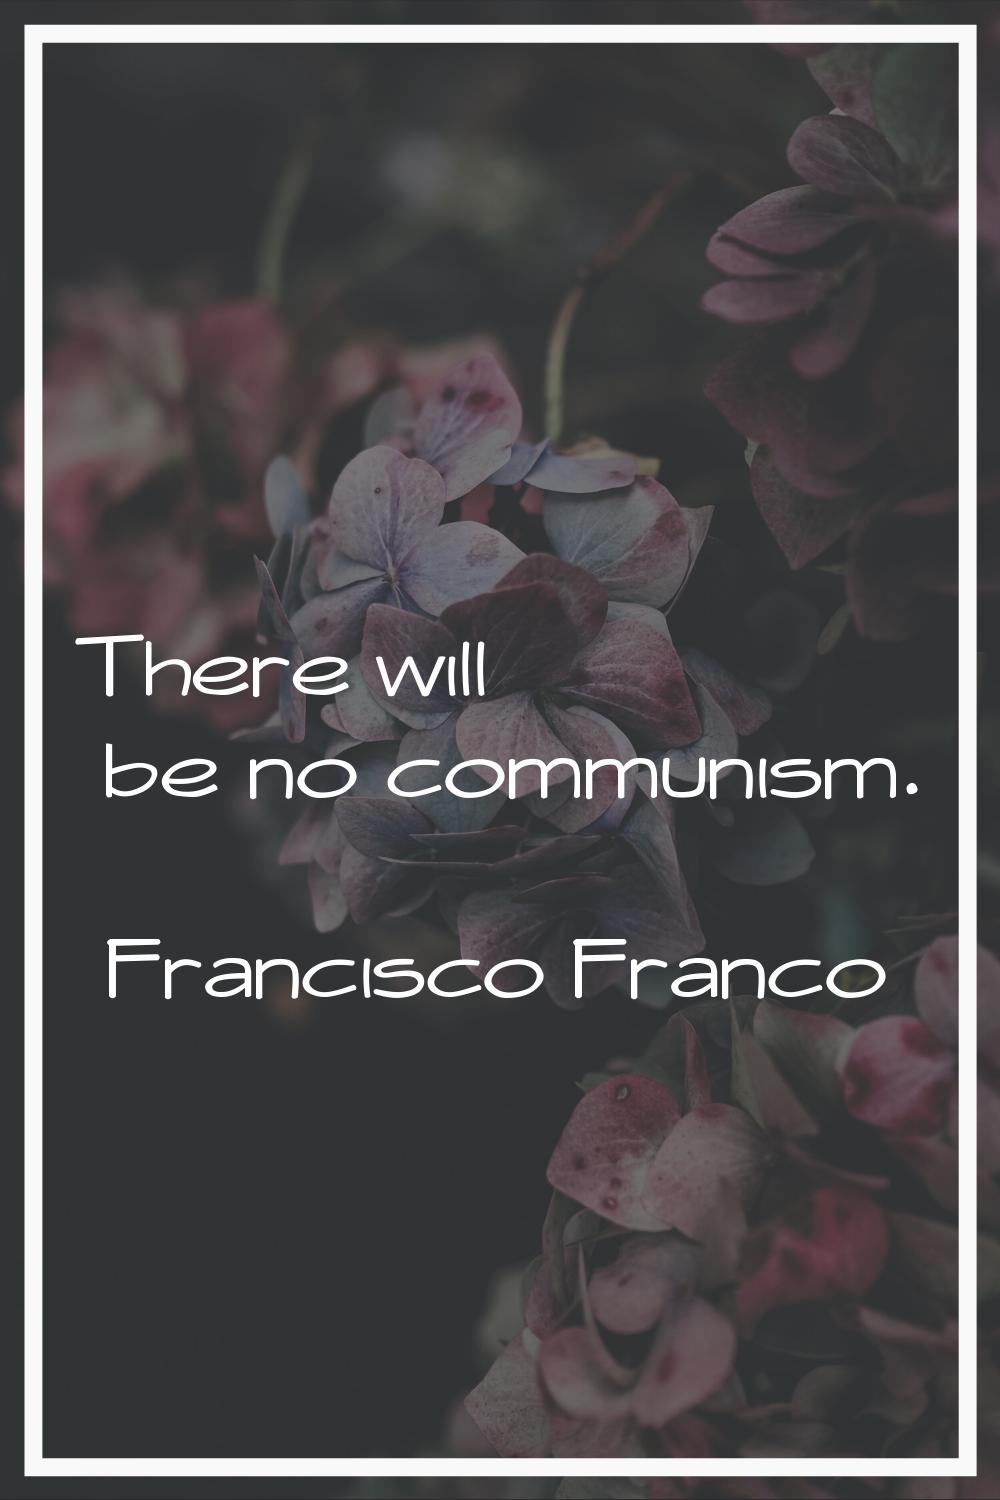 There will be no communism.